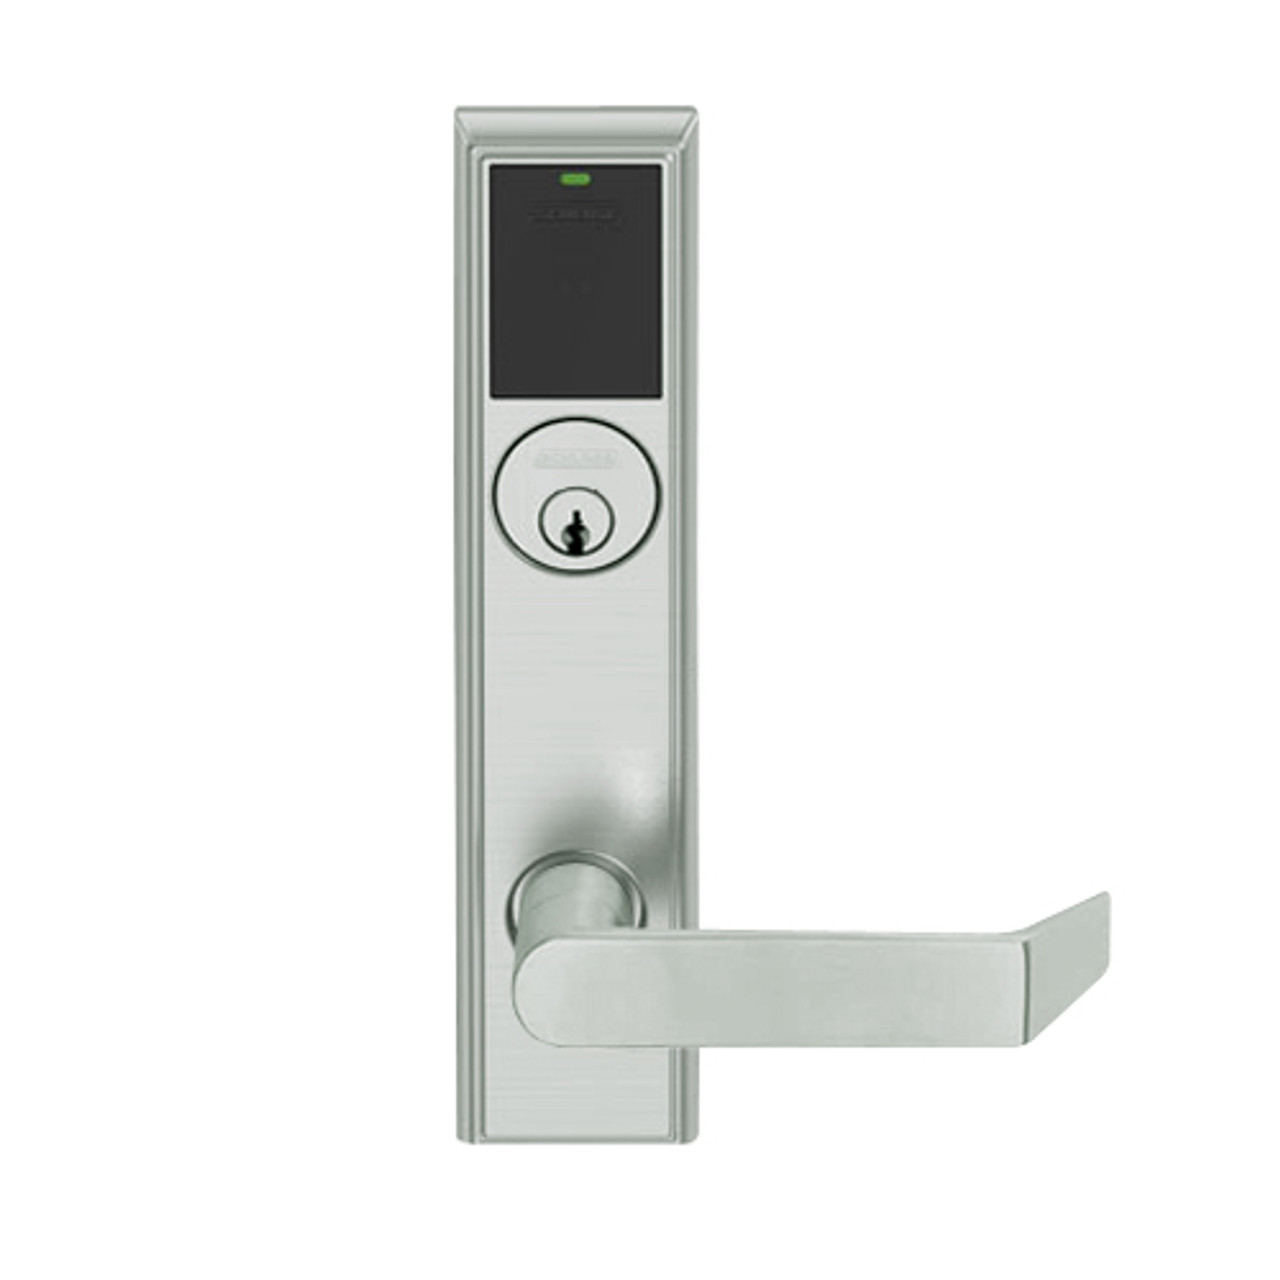 LEMD-ADD-P-06-619 Schlage Privacy/Apartment Wireless Addison Mortise Deadbolt Lock with LED and Rhodes Lever in Satin Nickel